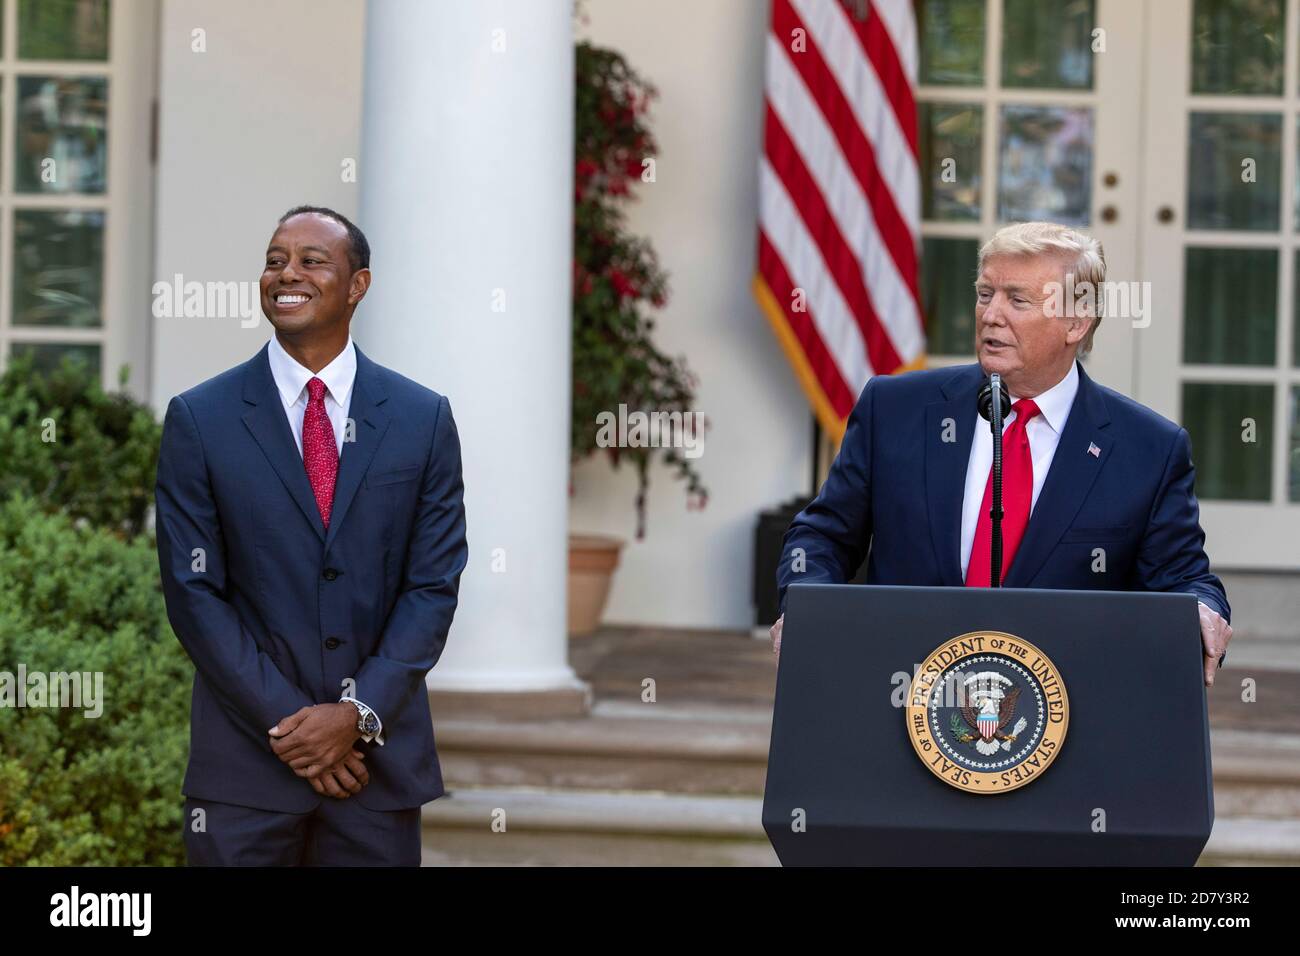 U.S. President Donald Trump delivers remarks before presenting the Presidential Medal of Freedom to Golfer Tiger Woods in the Rose Garden of the White House in Washington, D.C. on Monday, May 6, 2019. The Presidential Medal of Freedom is the highest honor a U.S. President can bestow on a civilian. Credit: Alex Edelman/The Photo Access Stock Photo